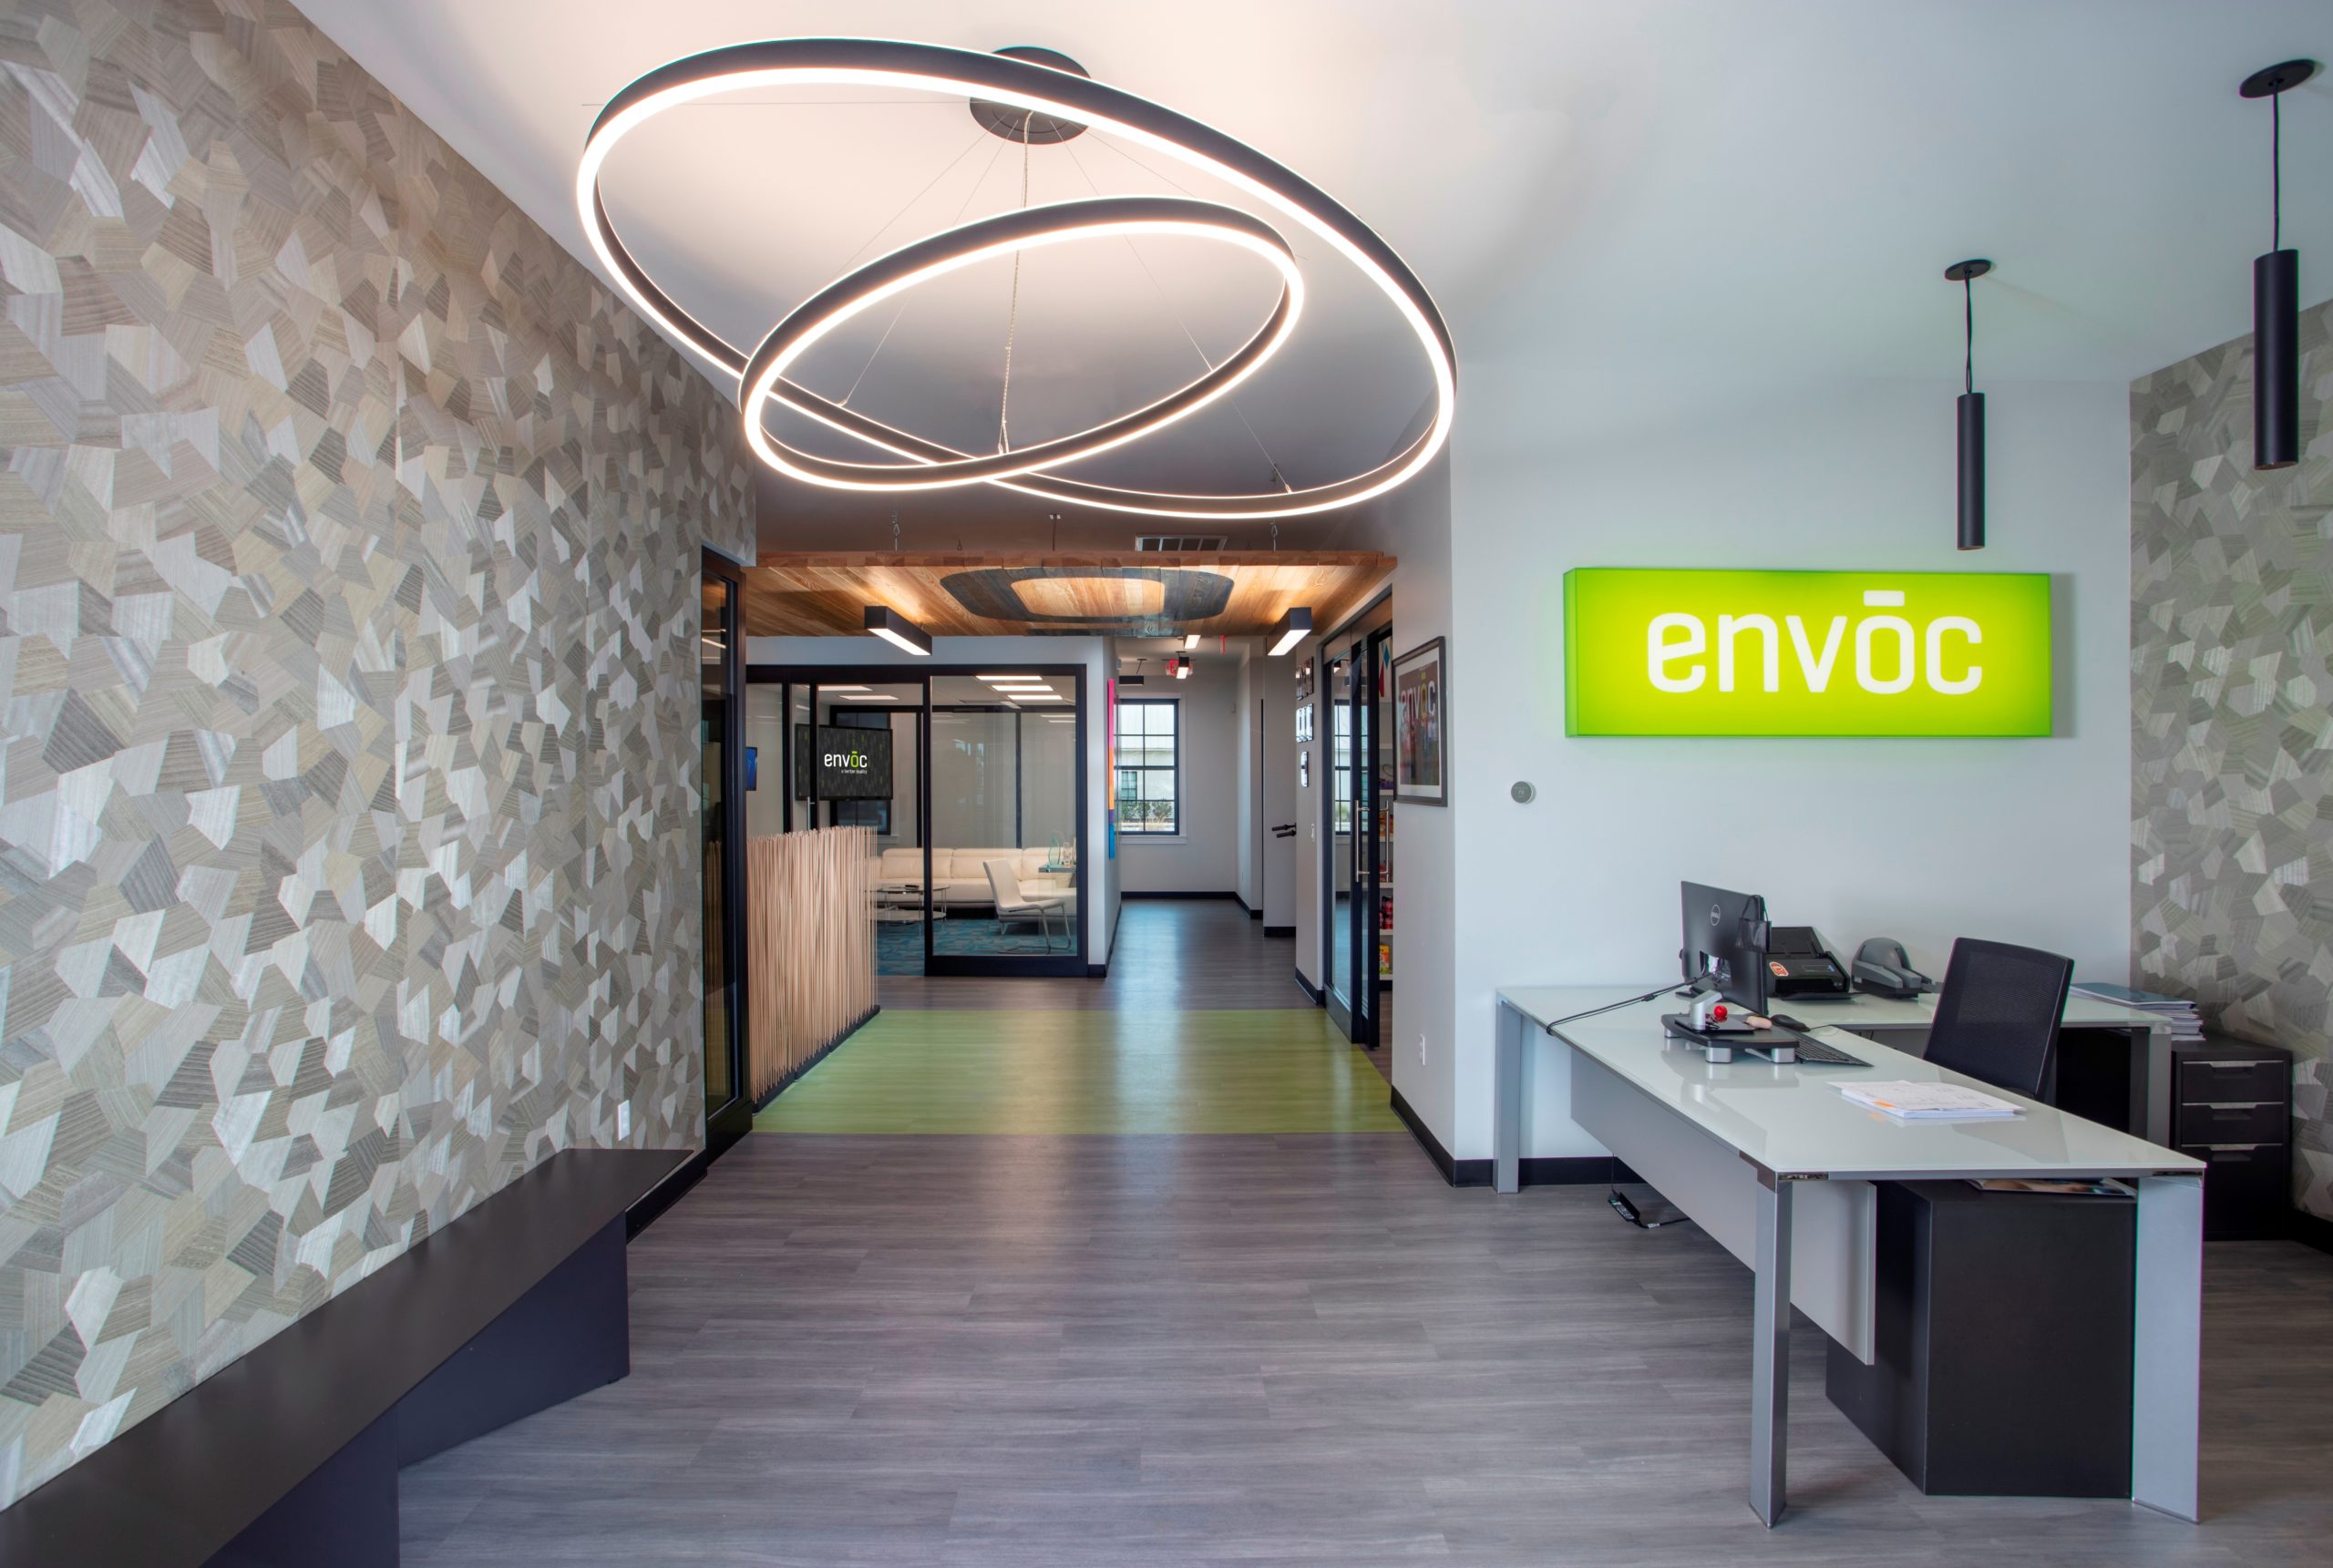 Envoc’s new Baton Rouge office space combines an edgy techy style with modern farmhouse